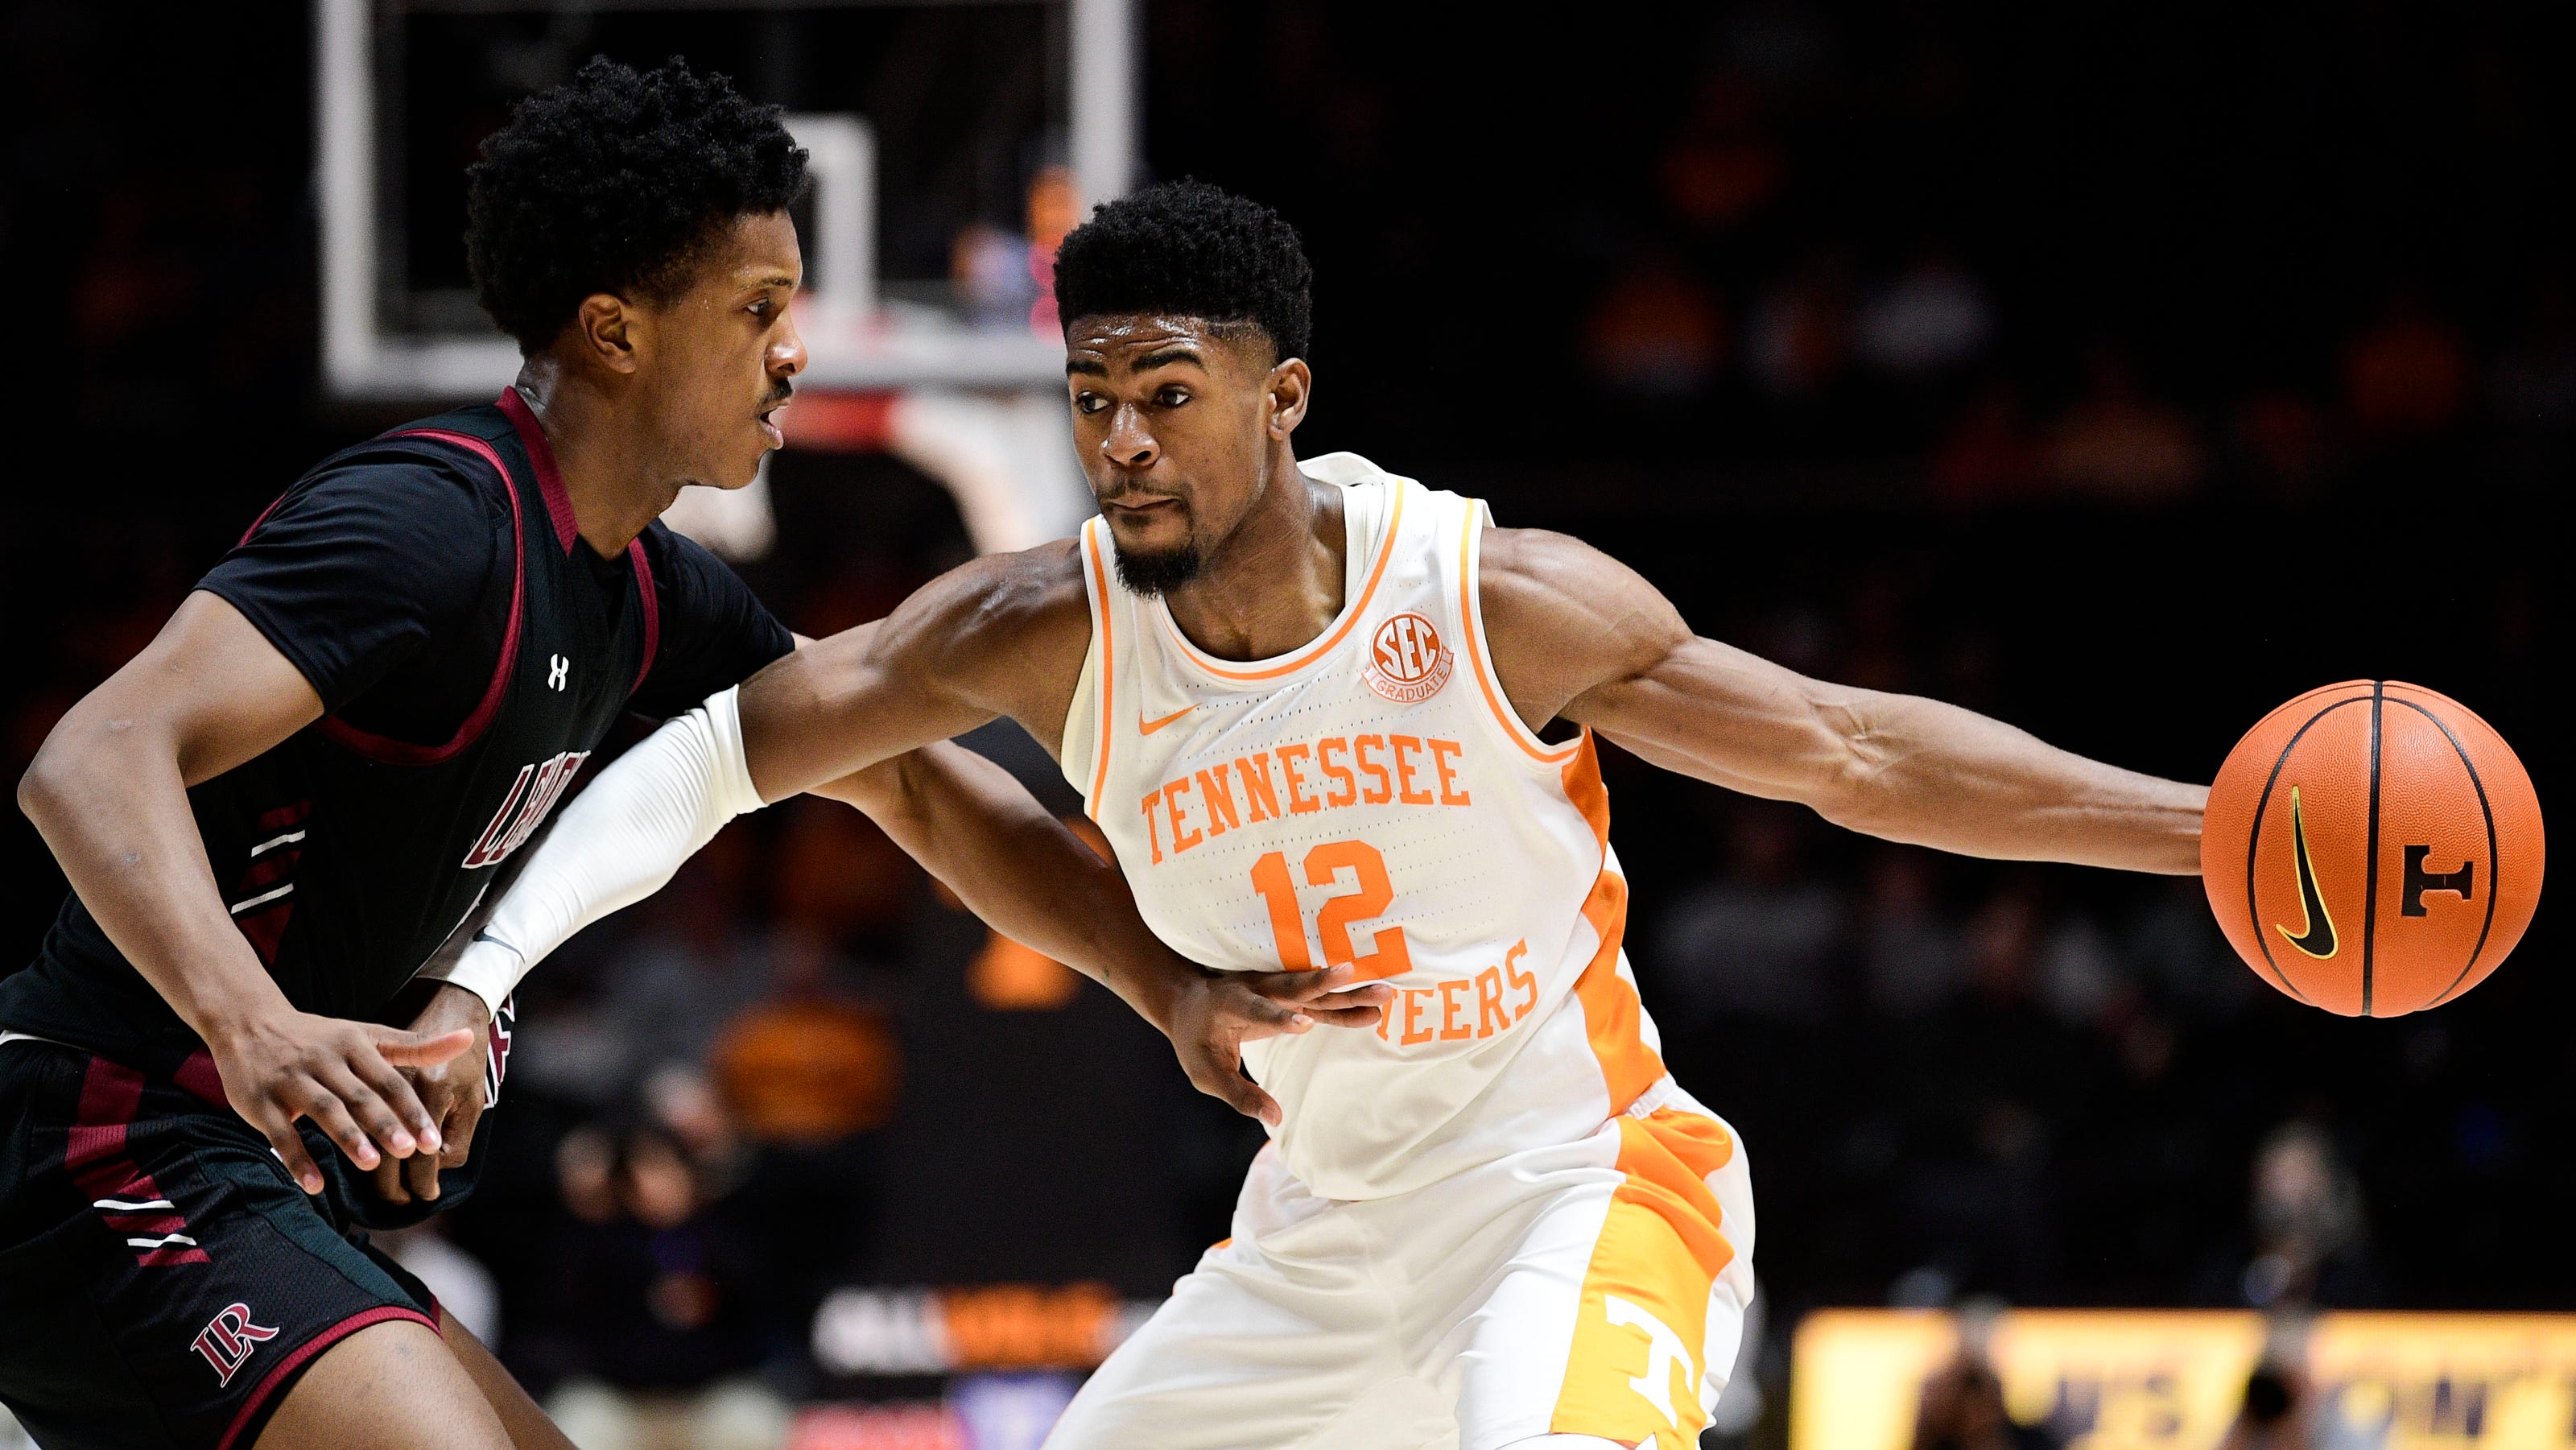 Here's the Tennessee basketball roster for the 202122 season